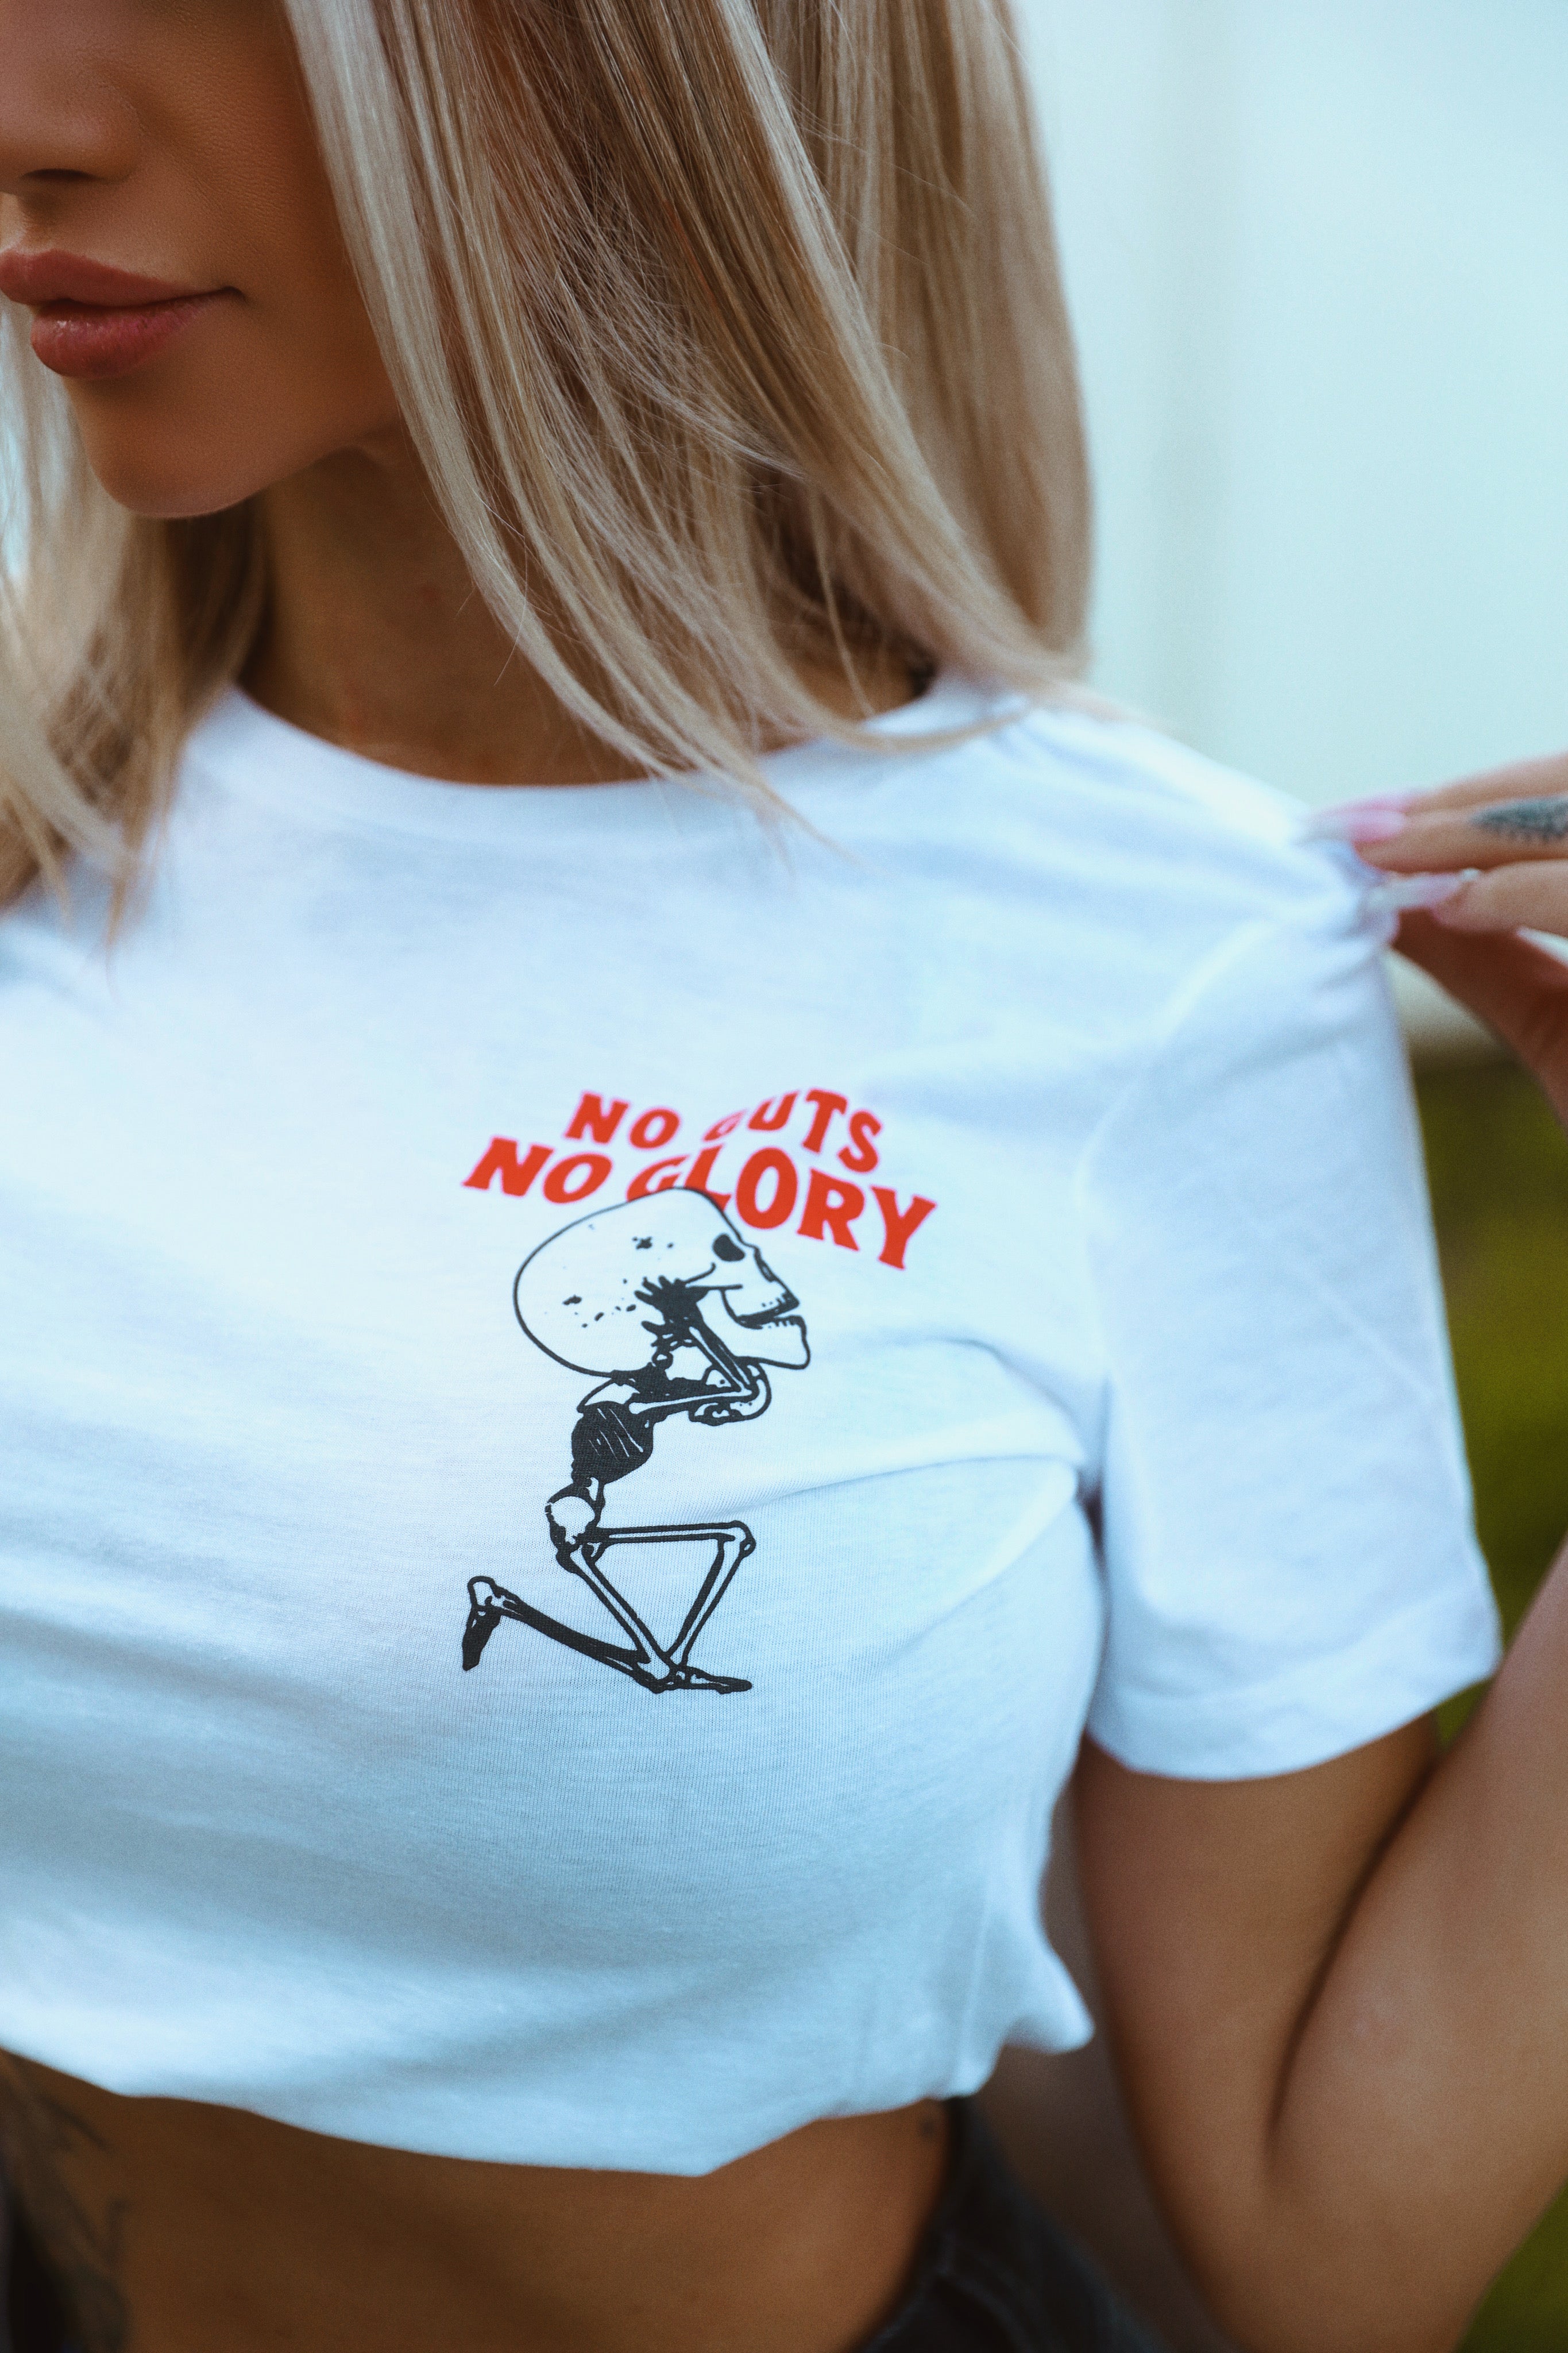 NO GUTS, NO GLORY graphic tee *XXL/3X ONLY